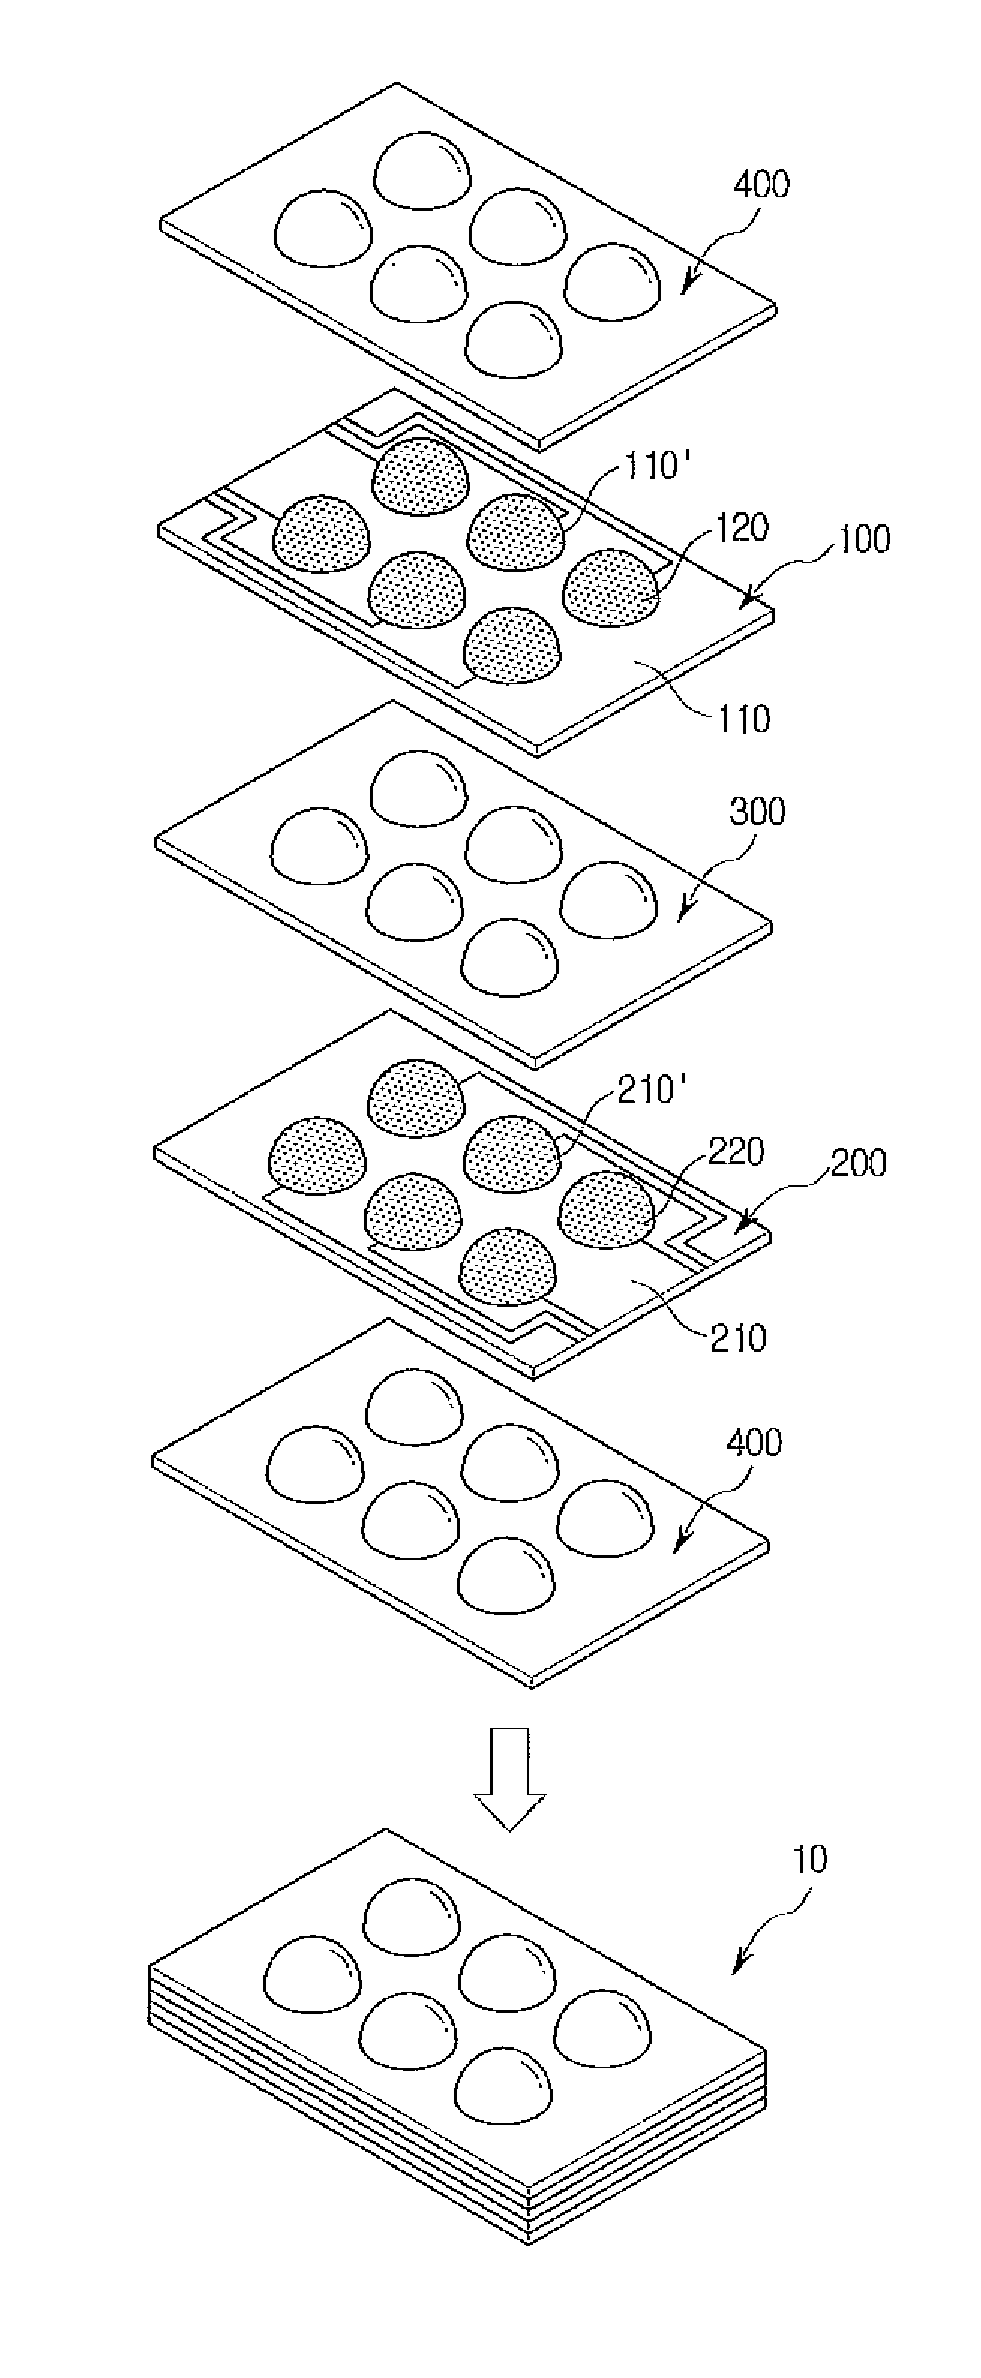 Active Skin for Conformable Tactile Interface